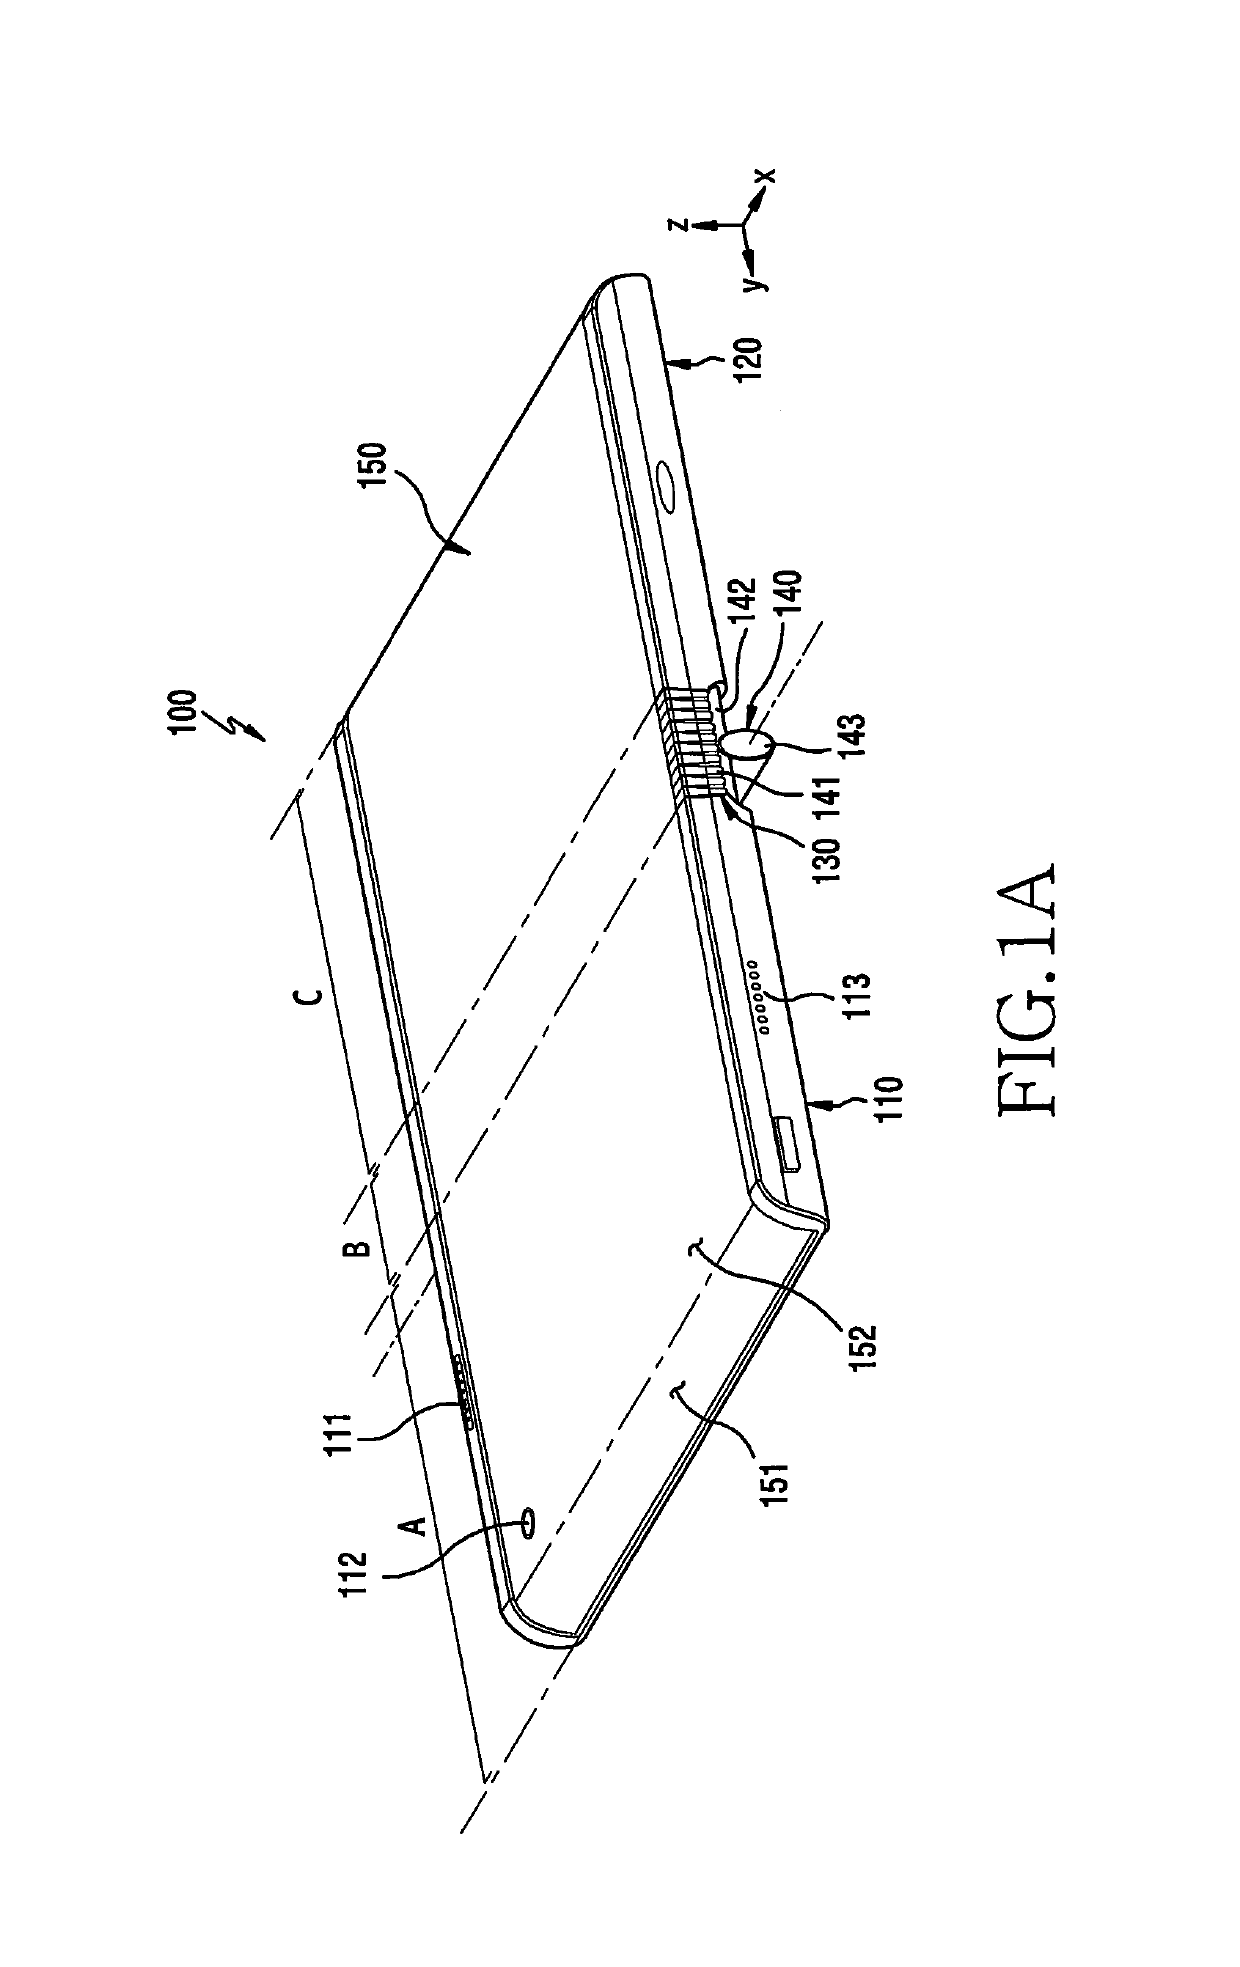 Foldable electronic device including flexible display